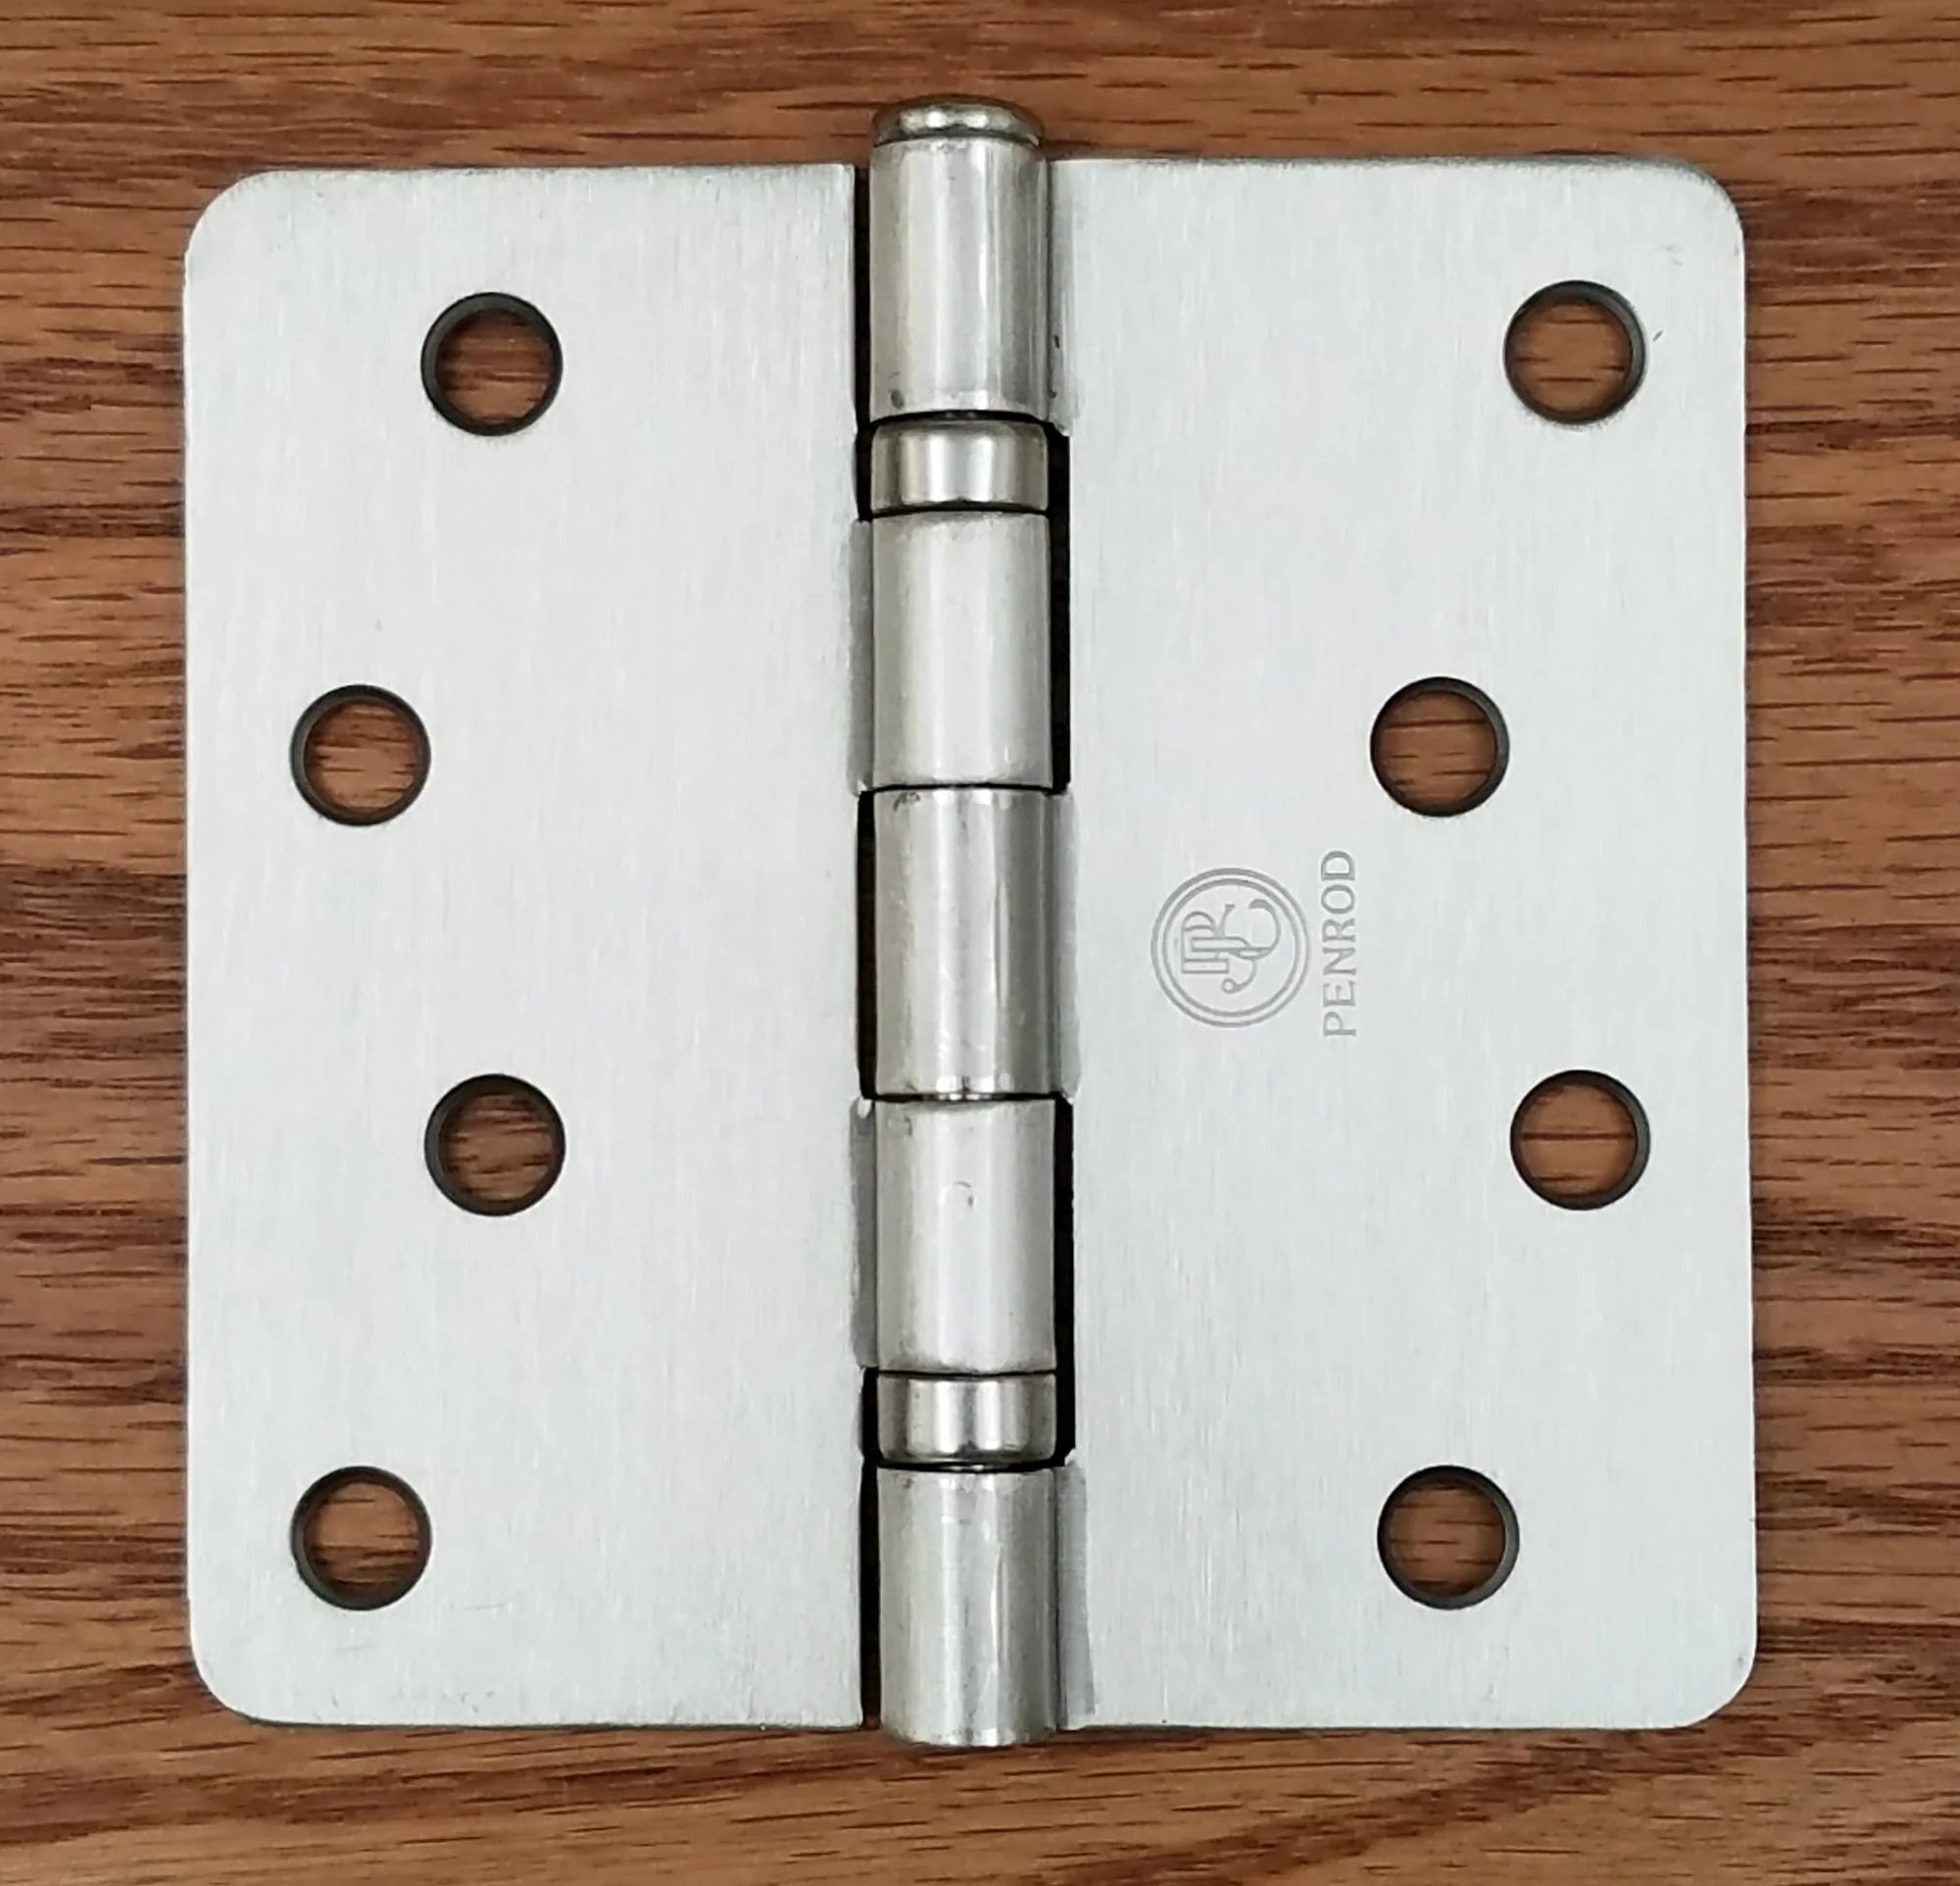 Clearance-Residential Penrod Ball Bearing Hinges - 4 Inch With 1/4 Inch Radius Corner - Satin Nickel-Sold Individually